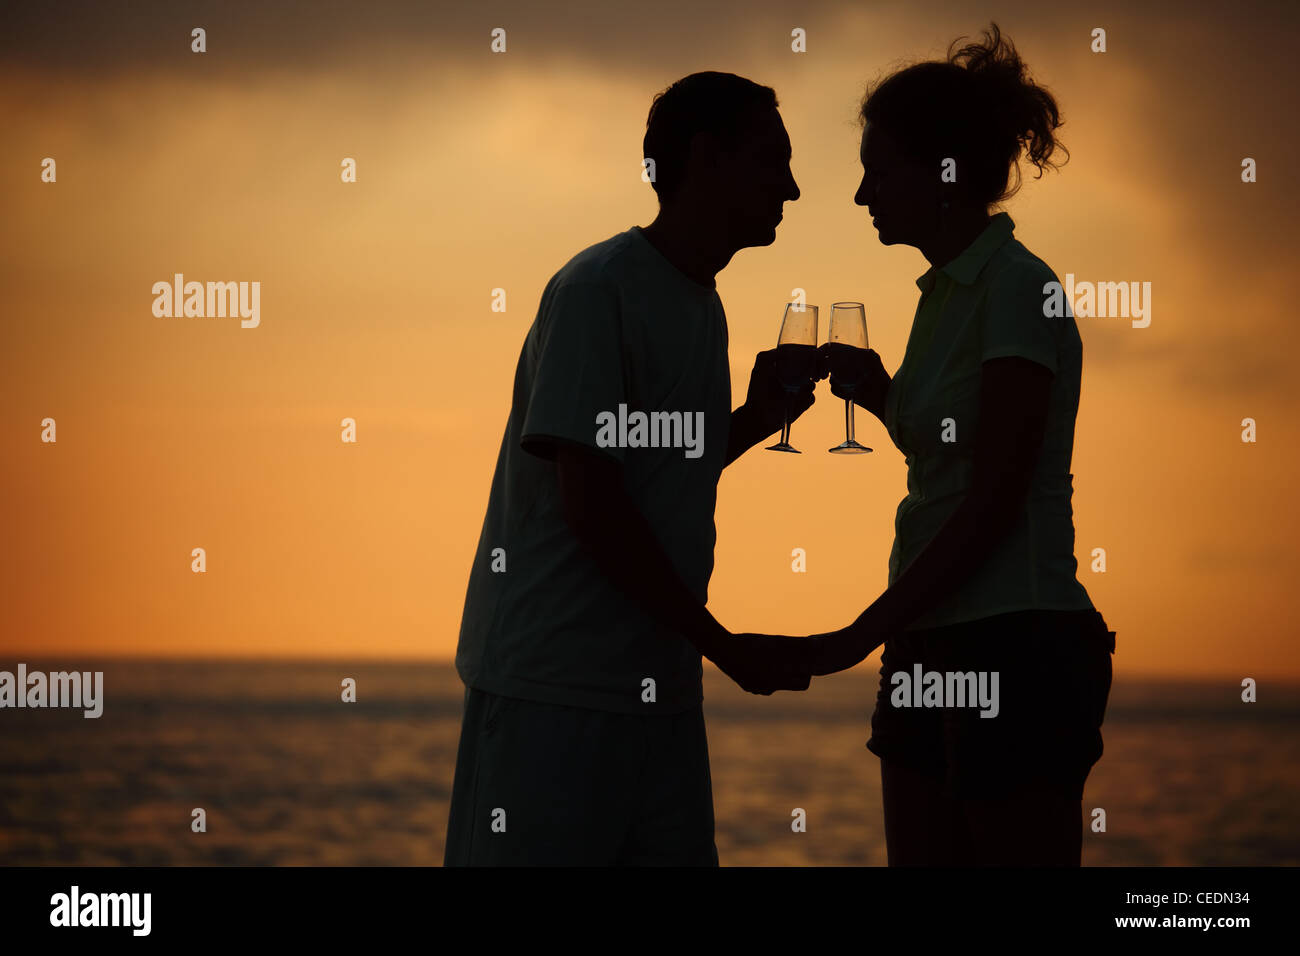 Silhouettes of man and woman with glasses on sea sunset Stock Photo